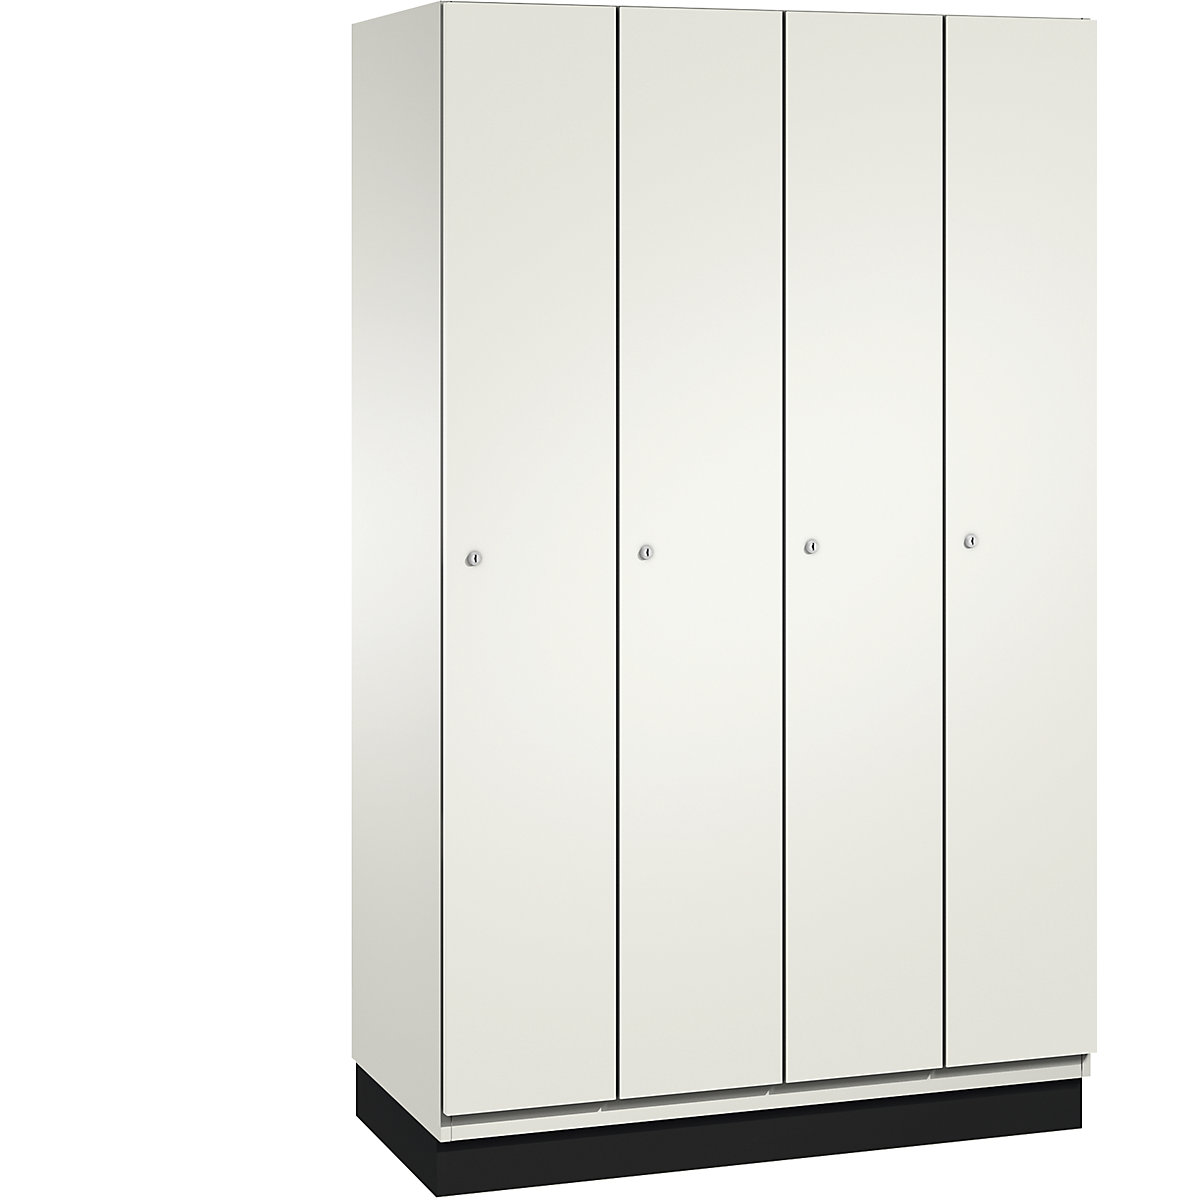 CAMBIO cloakroom locker with sheet steel doors – C+P, 4 compartments, 1200 mm wide, body pure white / door pure white-8